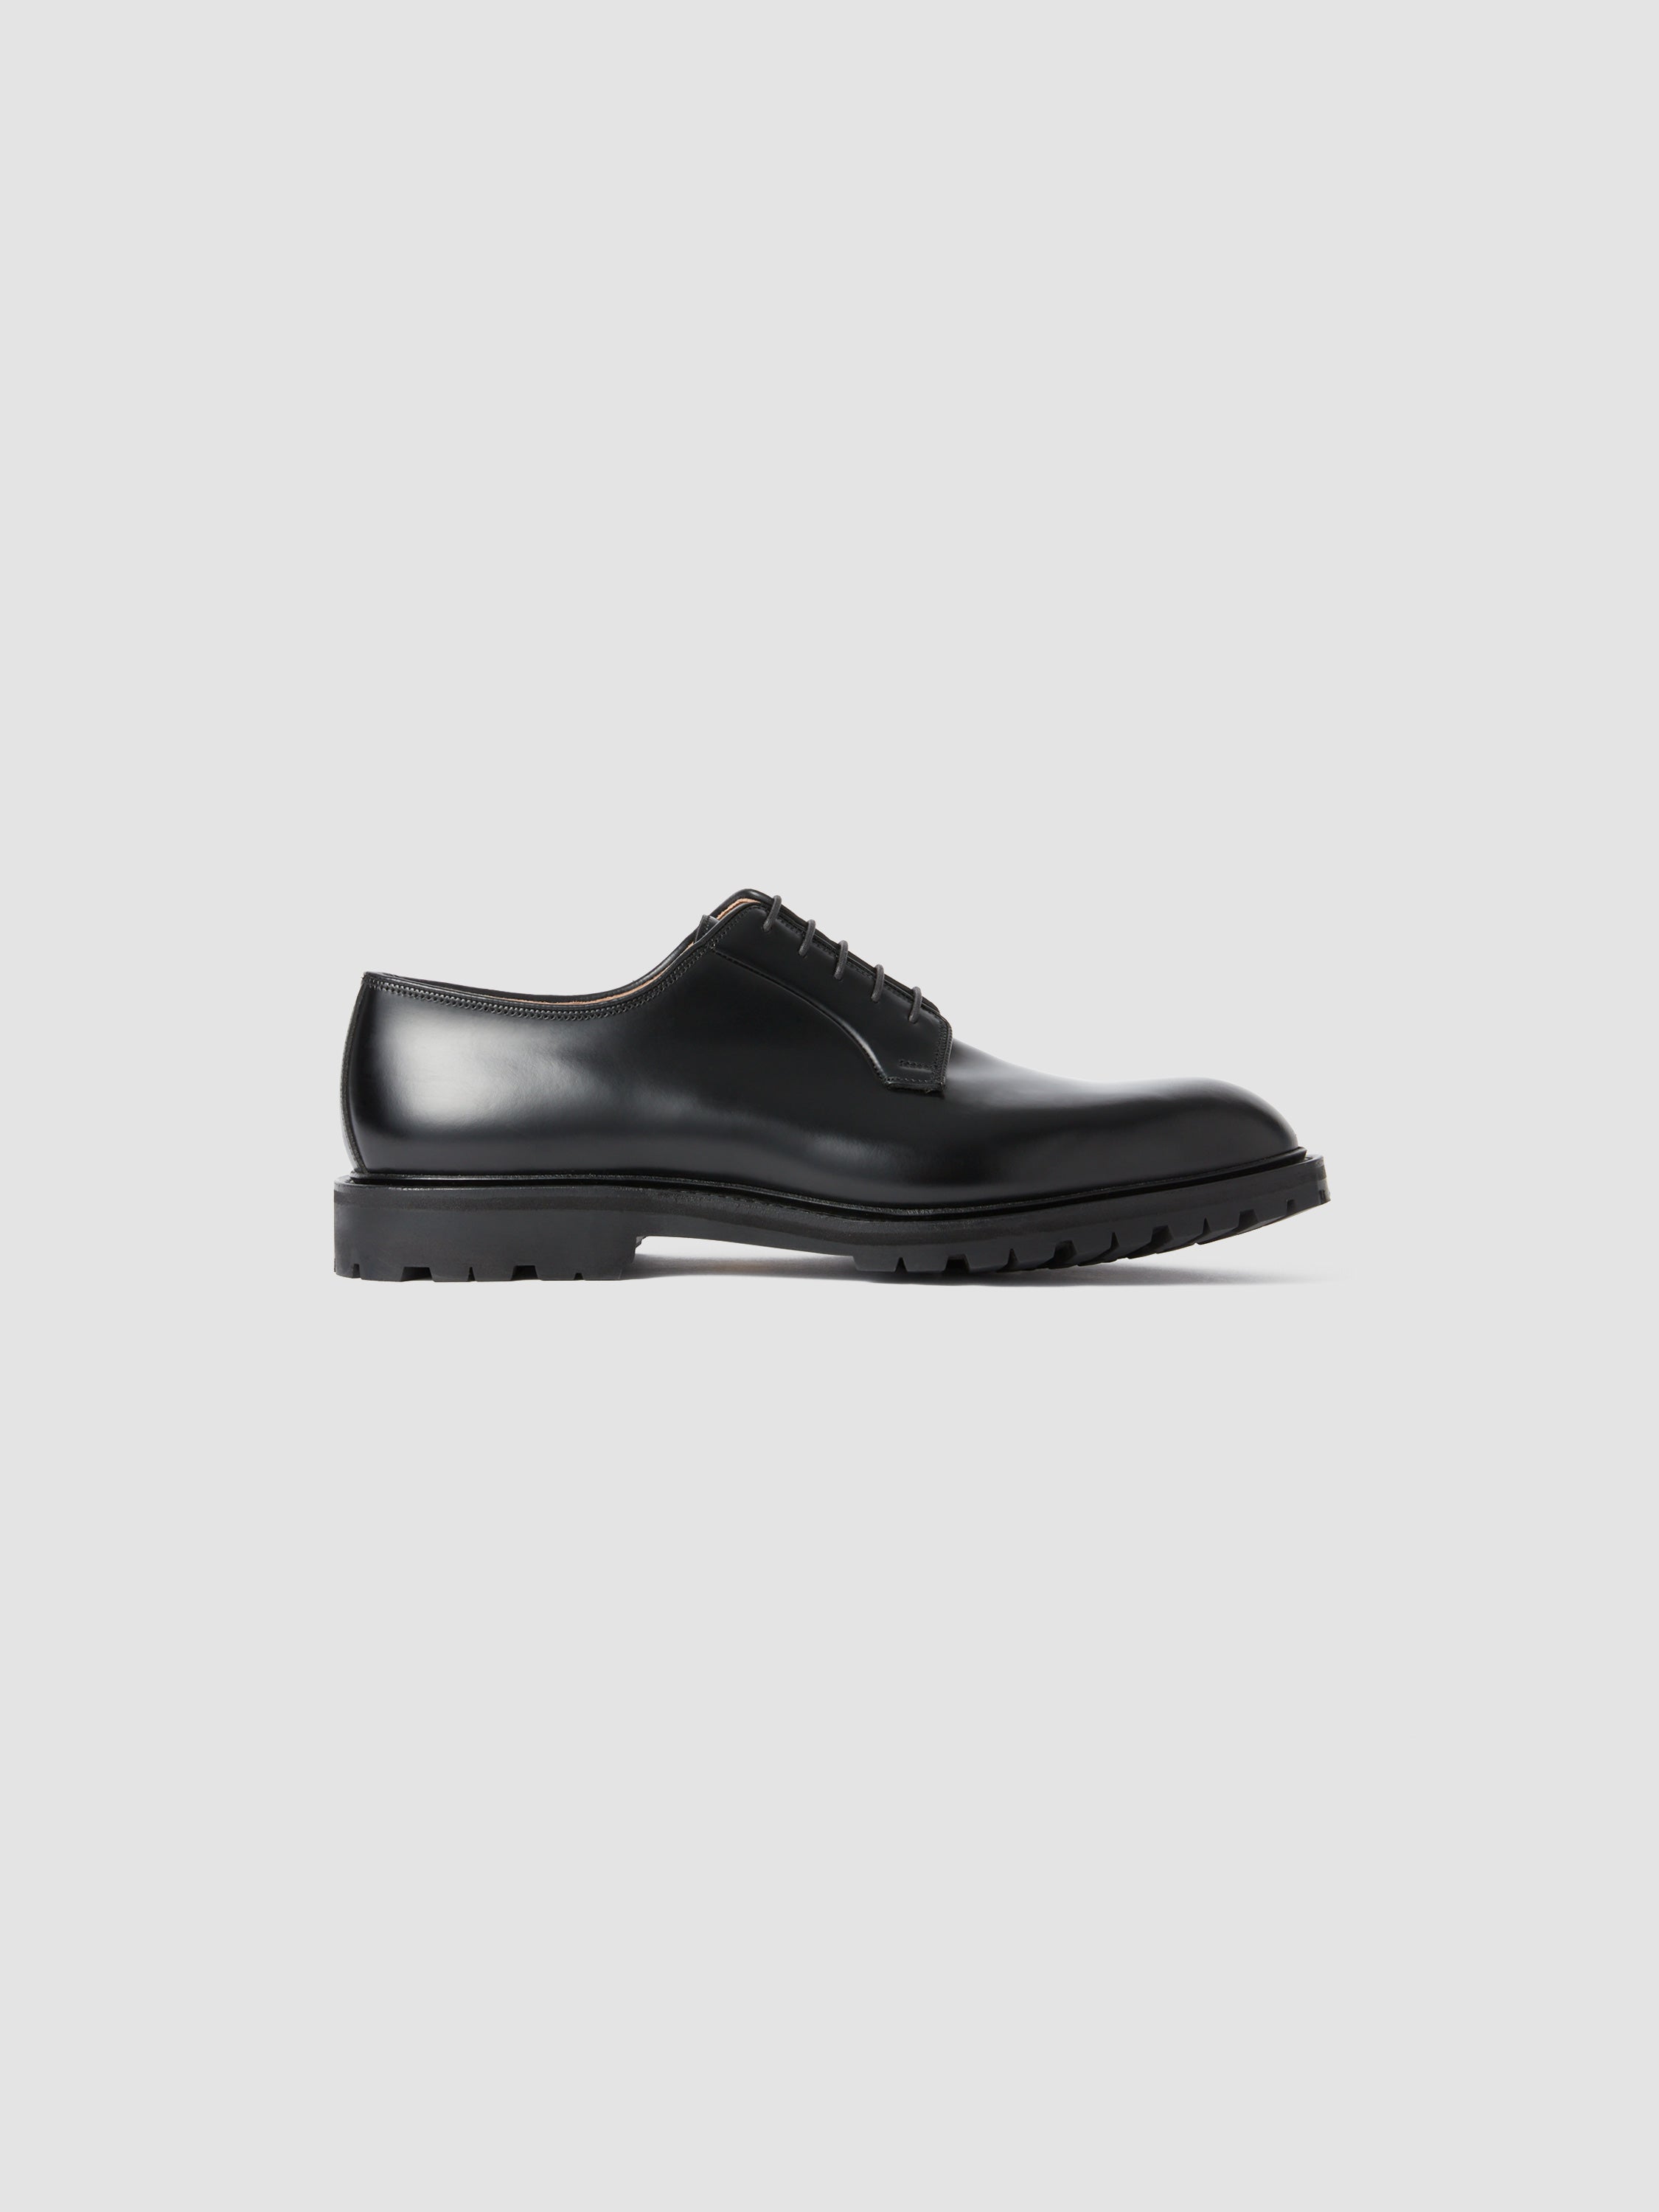 Calf Leather Derby Shoes Black Product Image Single Side